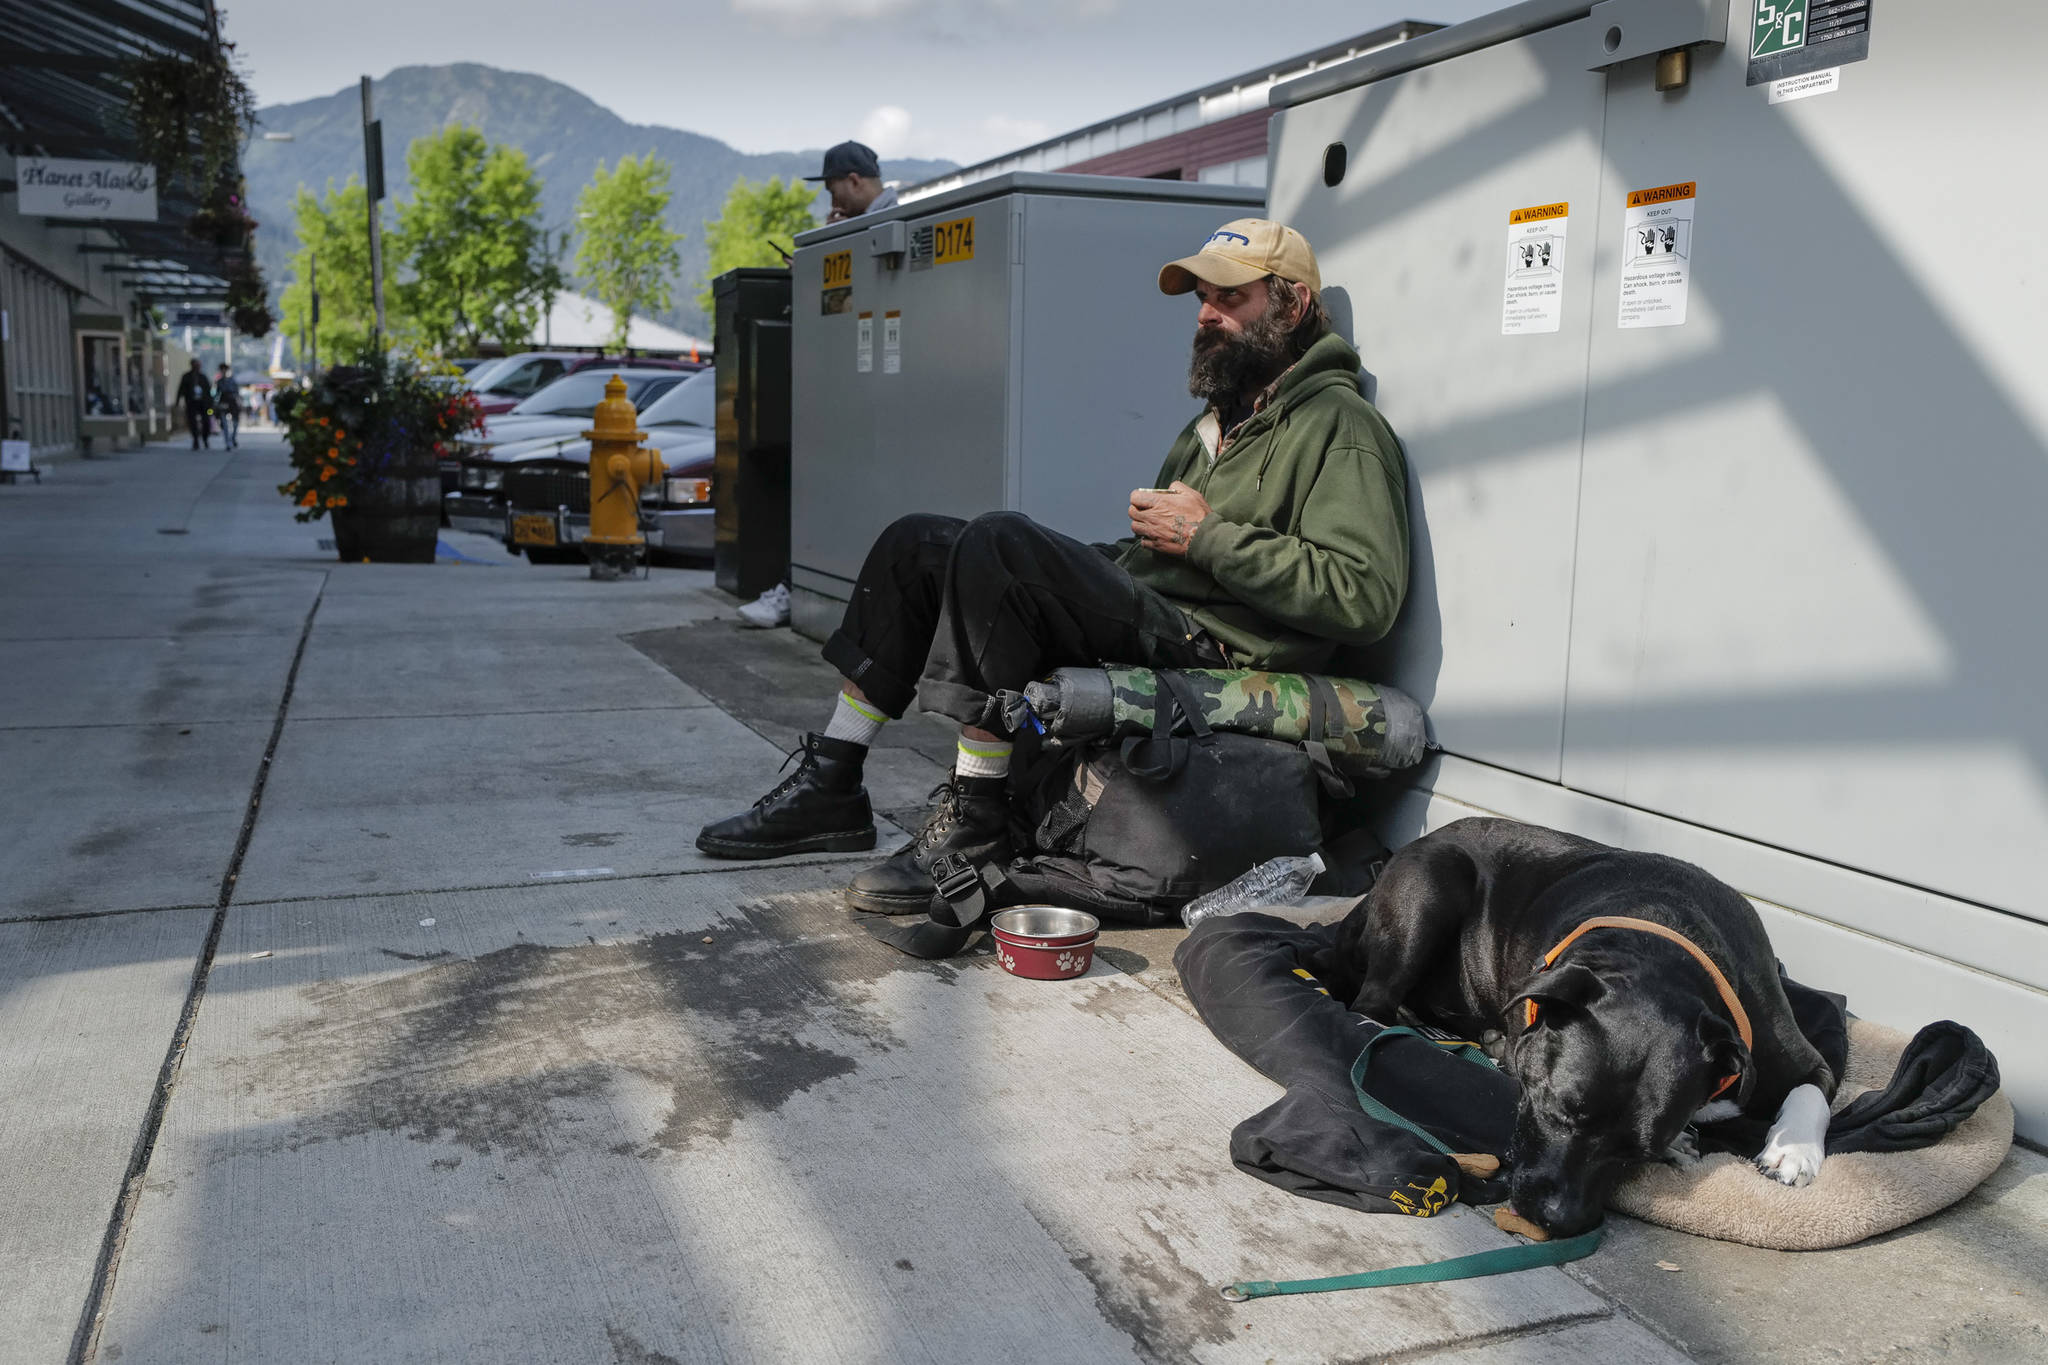 Woody MacAllister hangs out on Franklin Street at Ferry Way with his dog, Rainy, on Tuesday, Aug. 13, 2019. McAllister said he doesn’t stay at the Glory Hall, Juneau’s emergency shelter and soup kitchen, but does eat there. (Michael Penn | Juneau Empire)